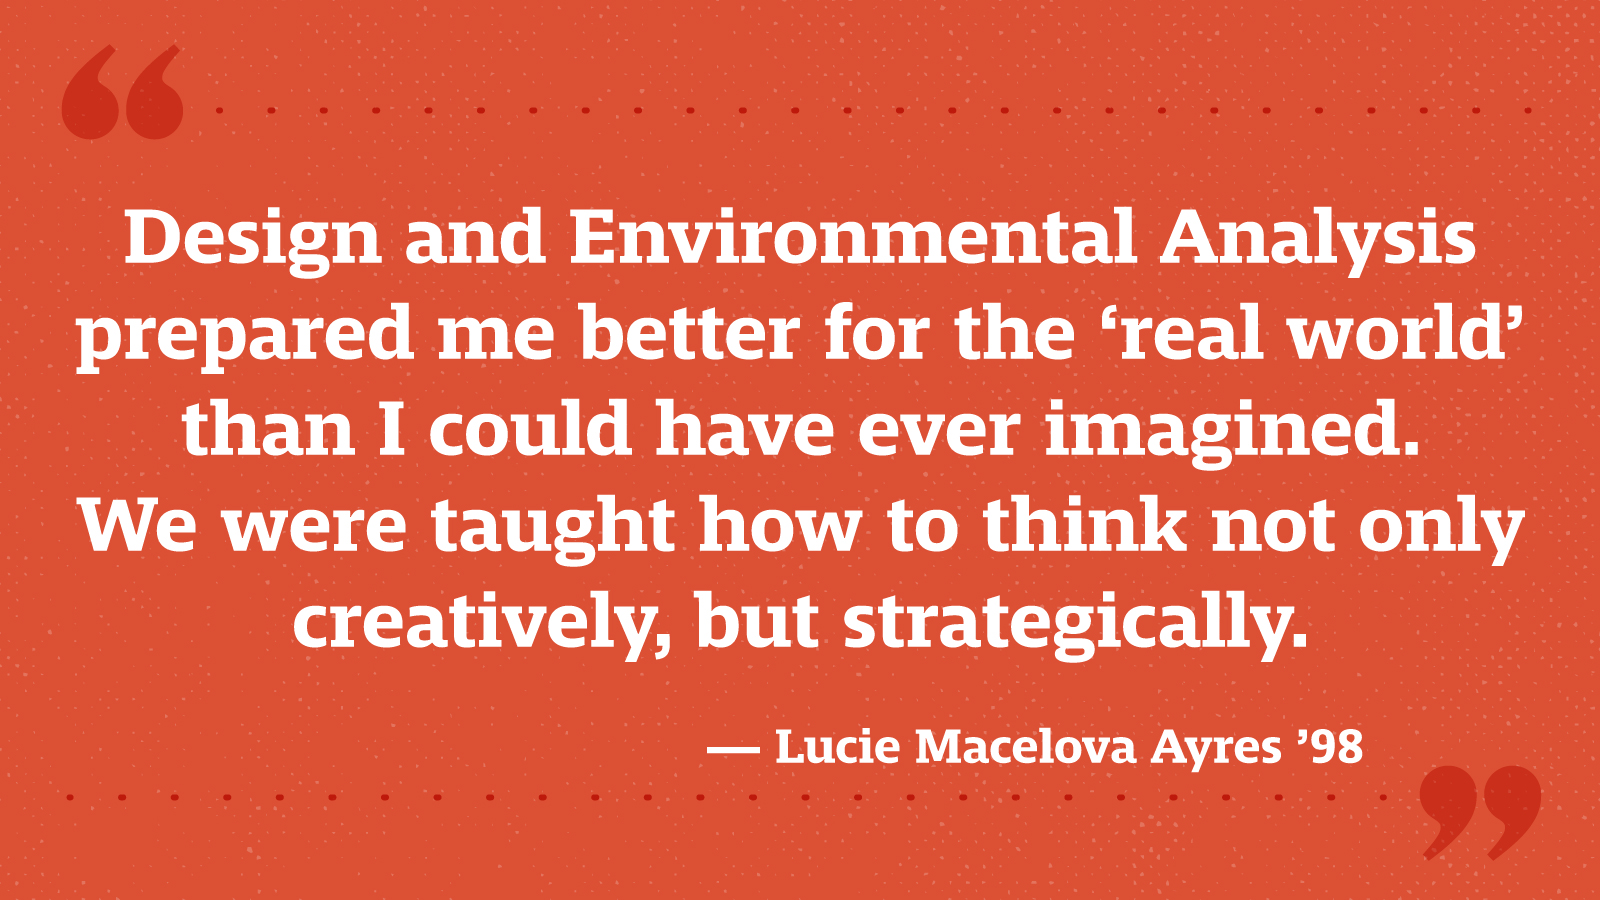 Design and Environmental Analysis prepared me better for the ‘real world’ than I could have ever imagined. We were taught how to think not only creatively, but strategically. — Lucie Macelova Ayres ’98